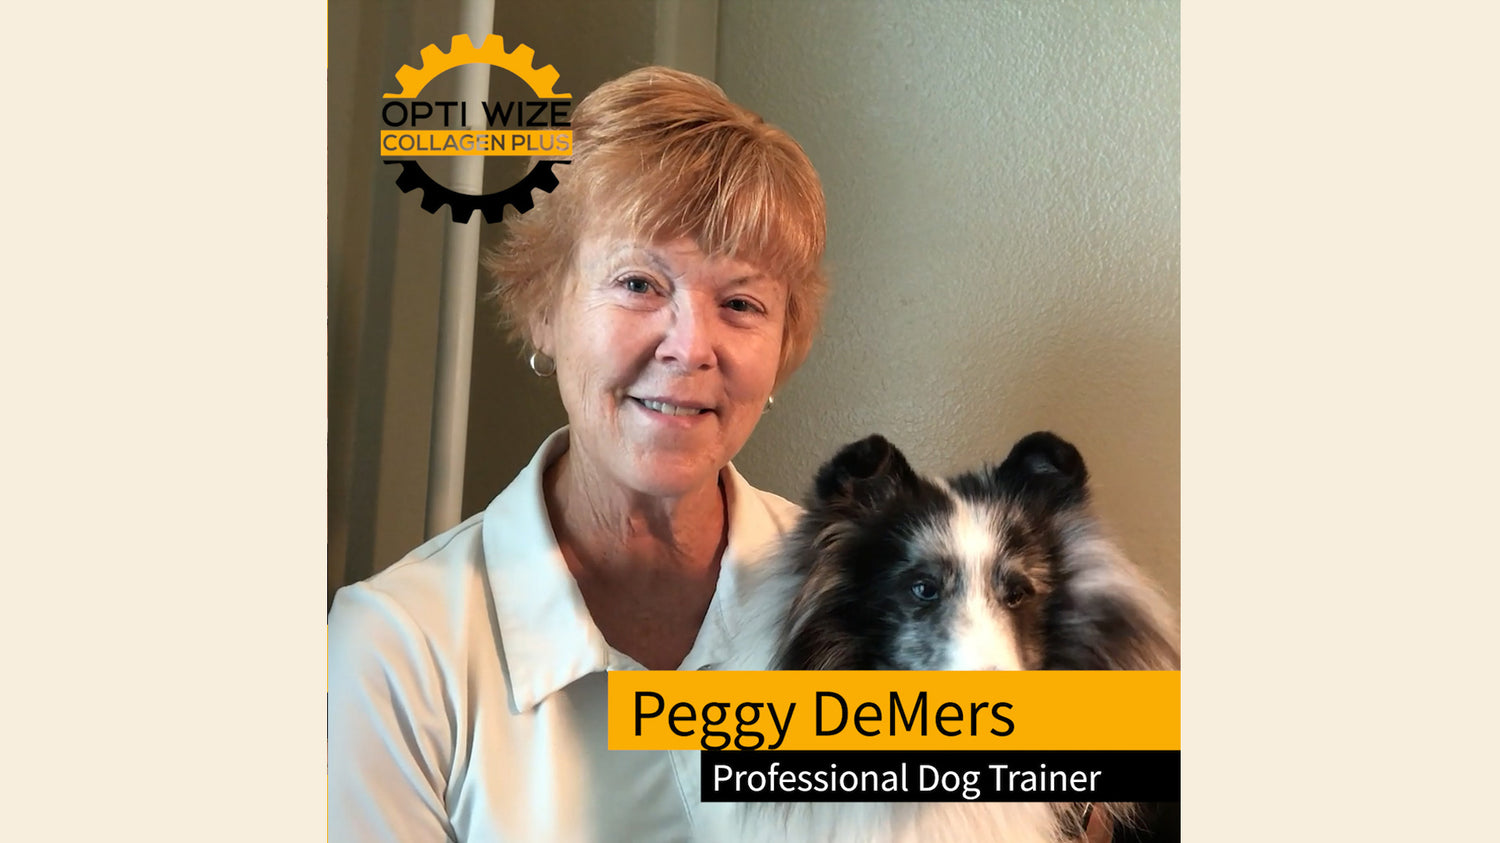 <p>Peggy DeMers has been showing in agility, obedience, rally, conformation and herding for over 20 years.  She has trained her dogs through multiple High in Trial wins from the novice classes, agility champions (MaCH and Bronze ADCH), and group 1-4 placements and Grand Champions in conformation. See why Peggy uses OptiWize as her dogs joint preventative maintenance supplement.</p>